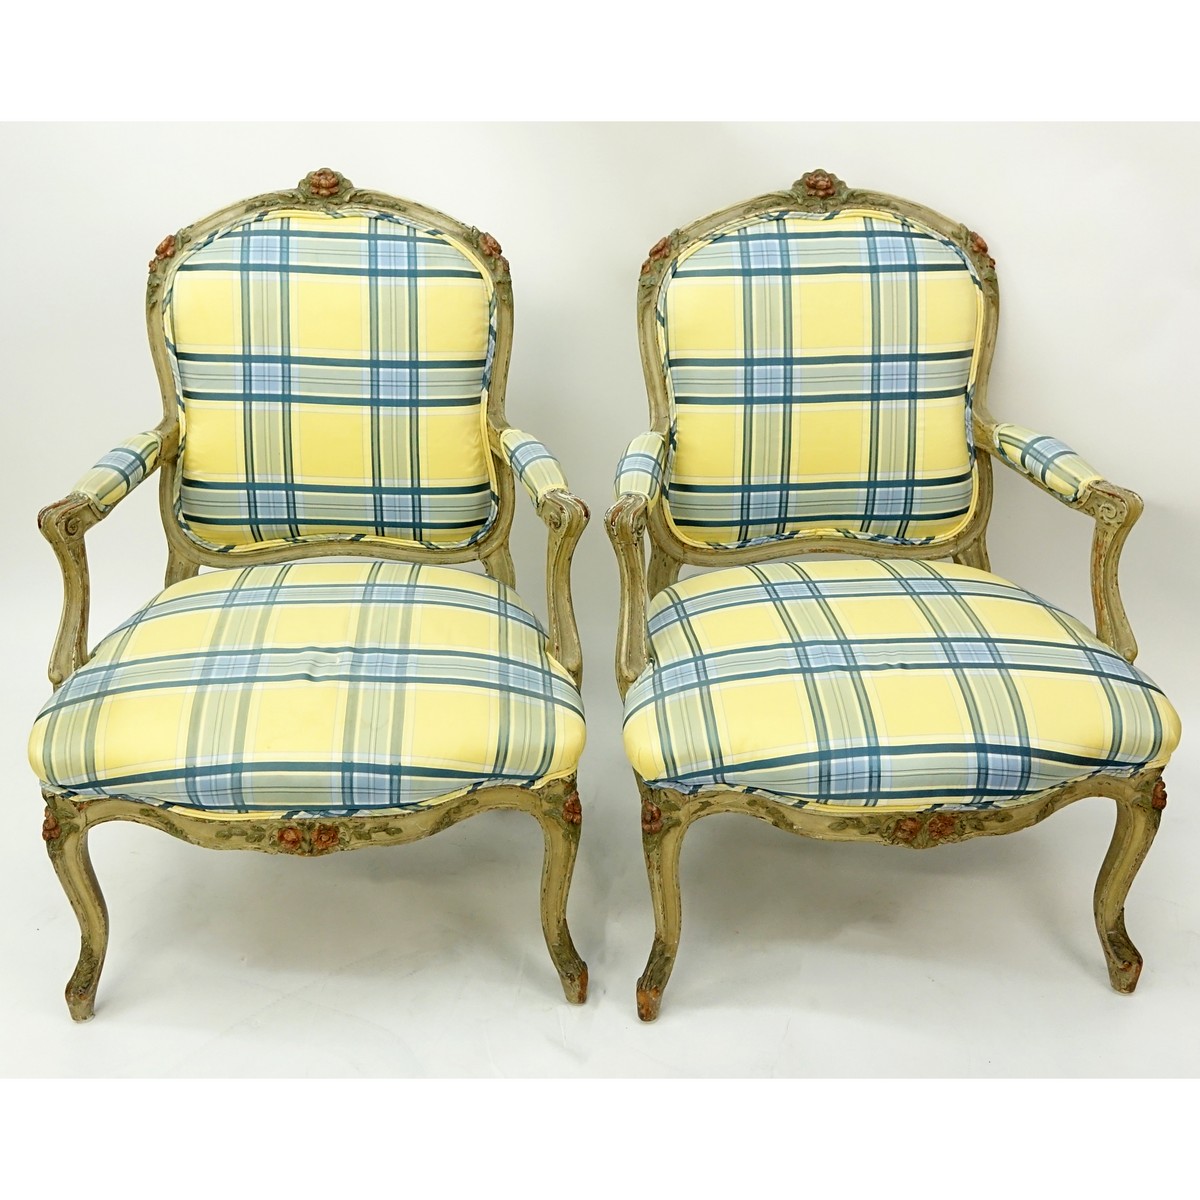 Pair of 18/19th Century French Carved Wood and Upholstered Fauteuils. Painted floral accents to frame, stands on cabriole legs.